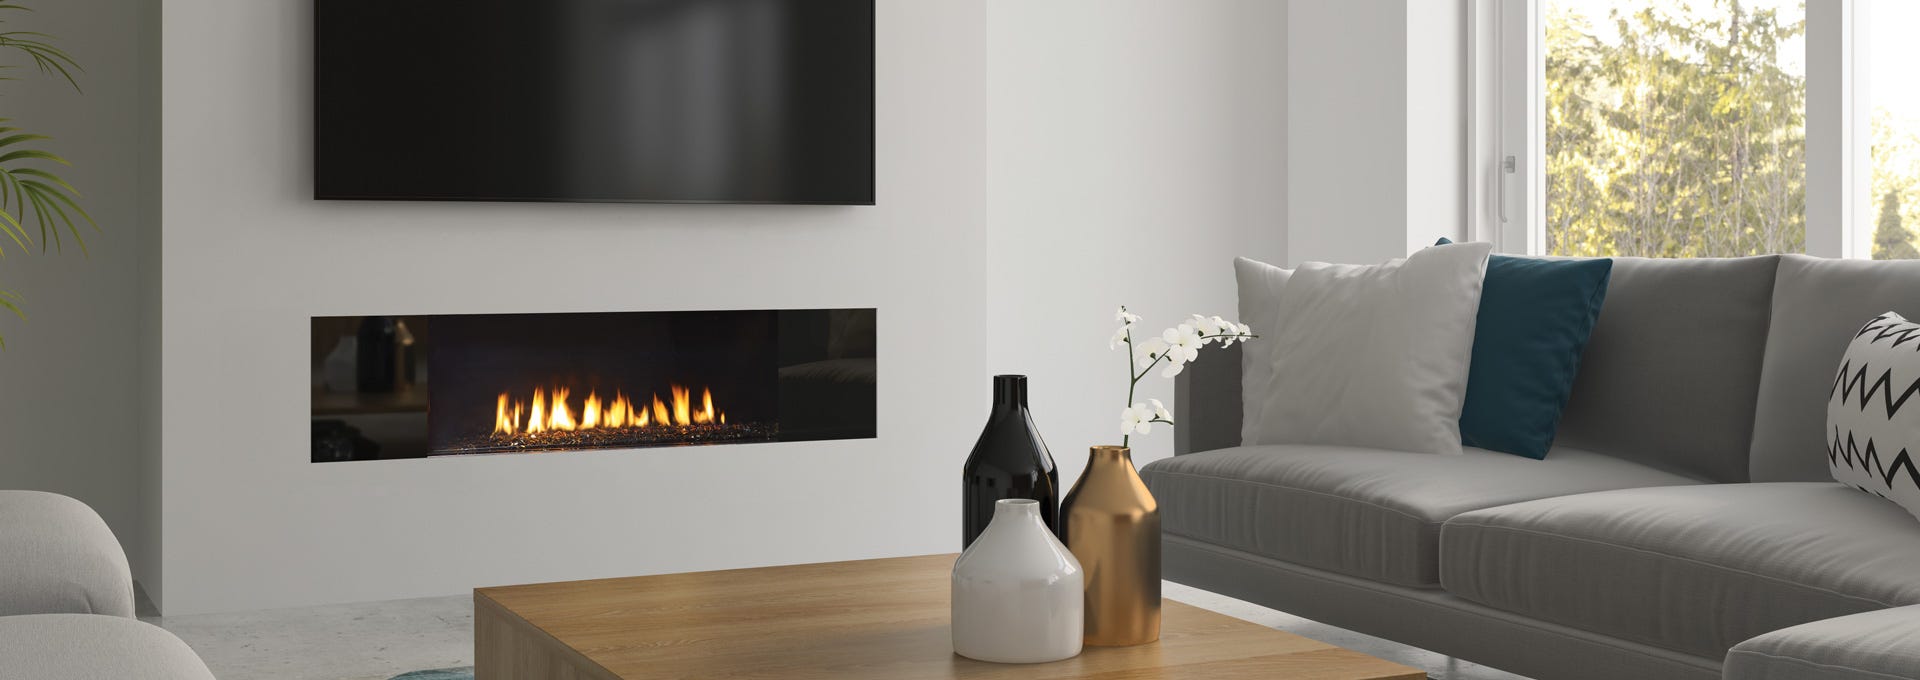 Some Known Incorrect Statements About Indoor Gas Fireplace